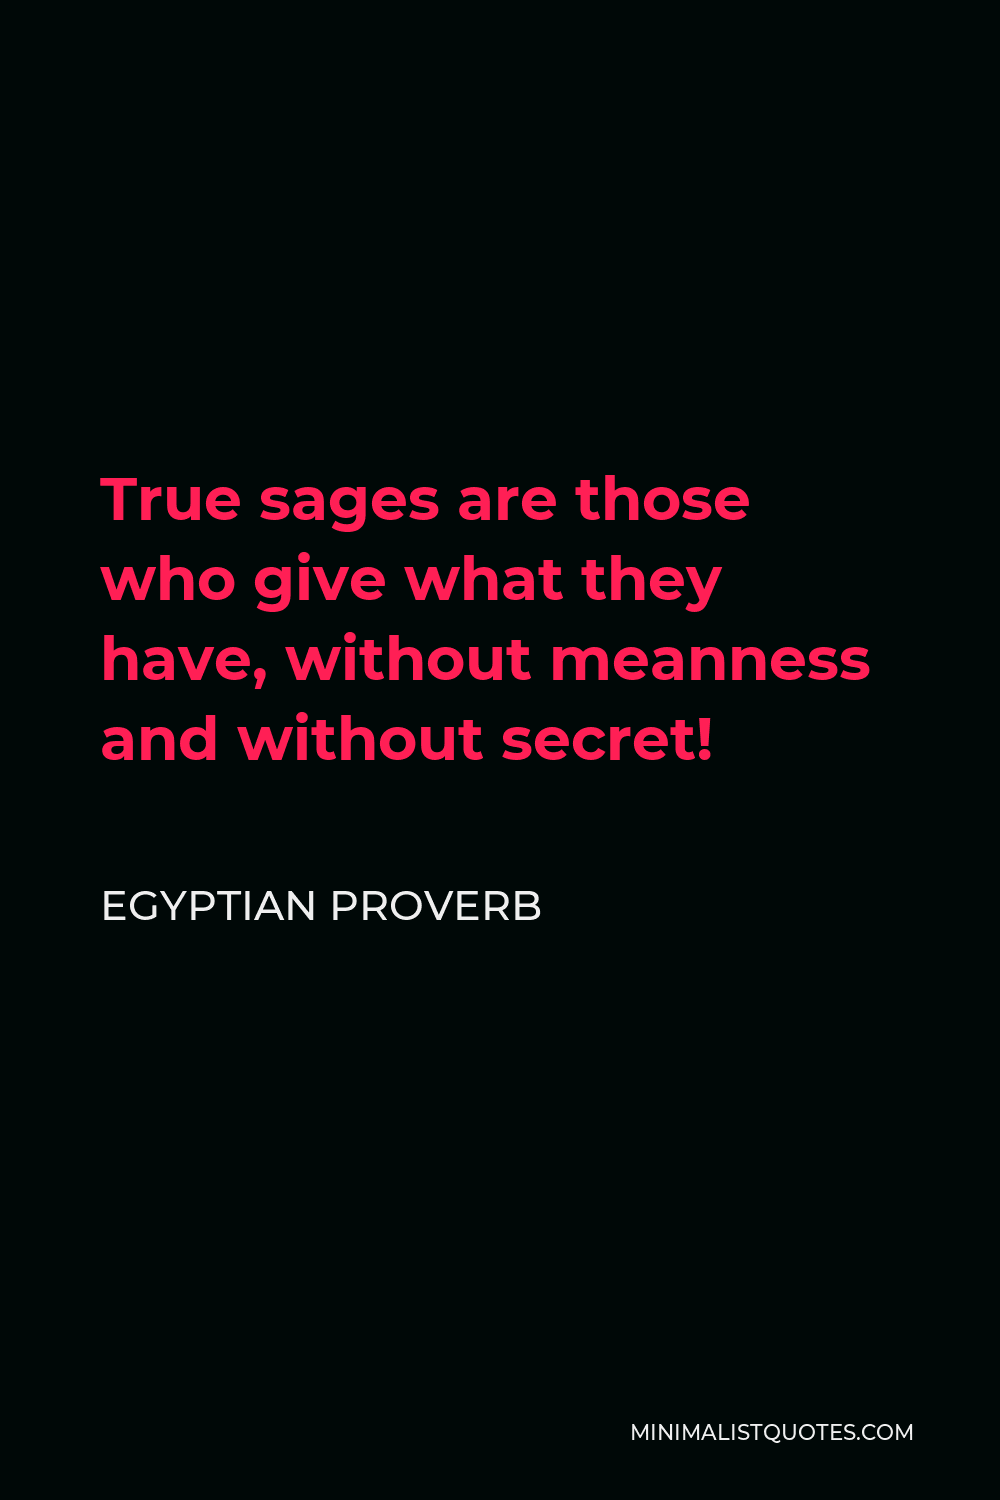 Egyptian Proverb Quote - True sages are those who give what they have, without meanness and without secret!